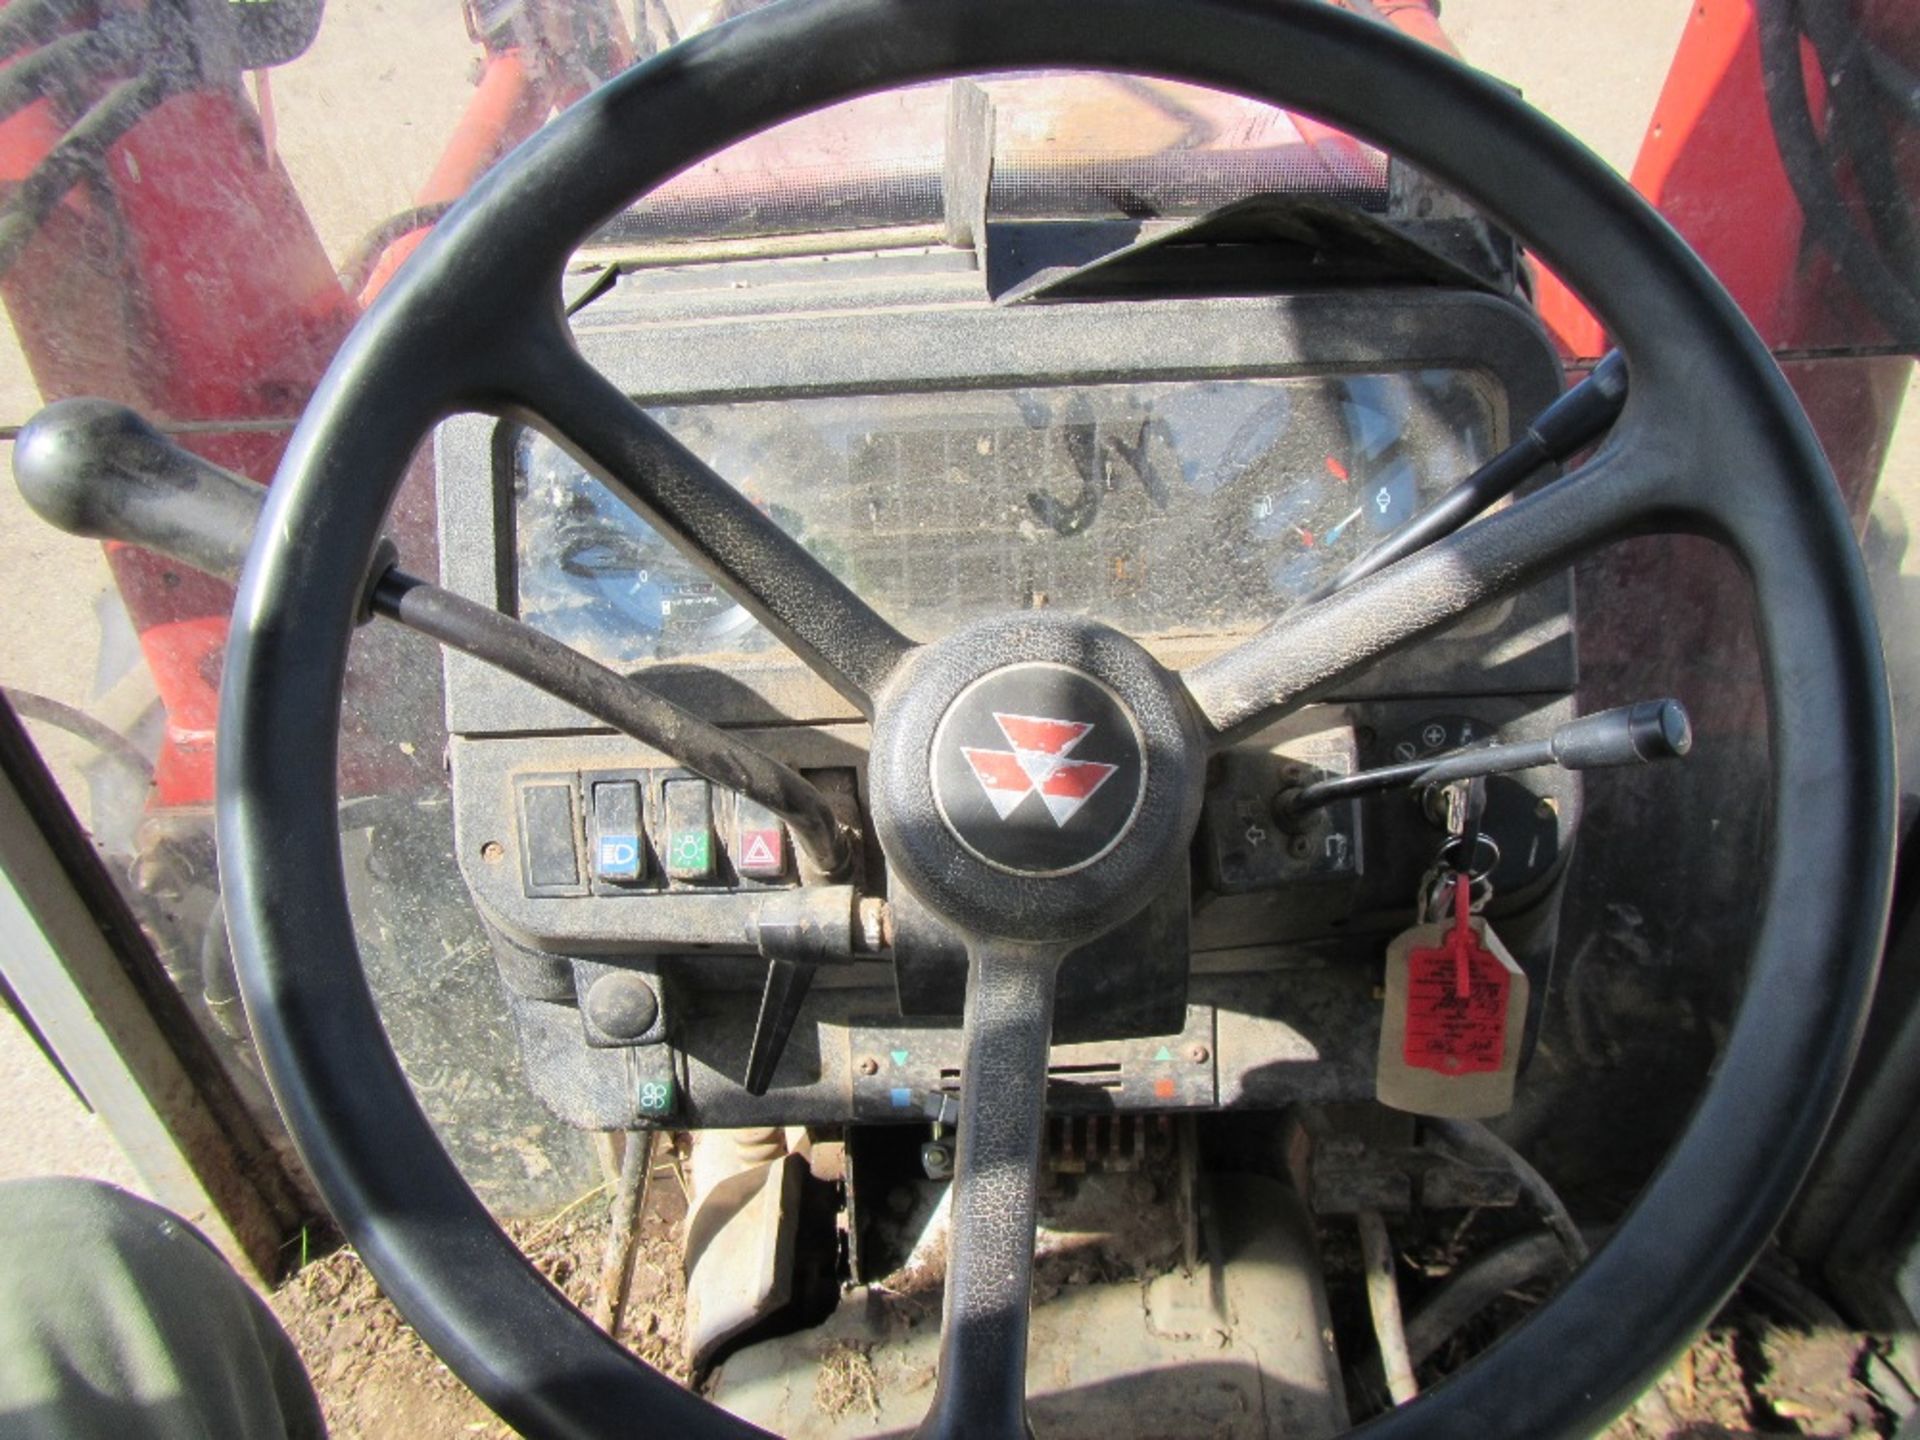 Massey Ferguson 390 Tractor with Loader - Image 15 of 16